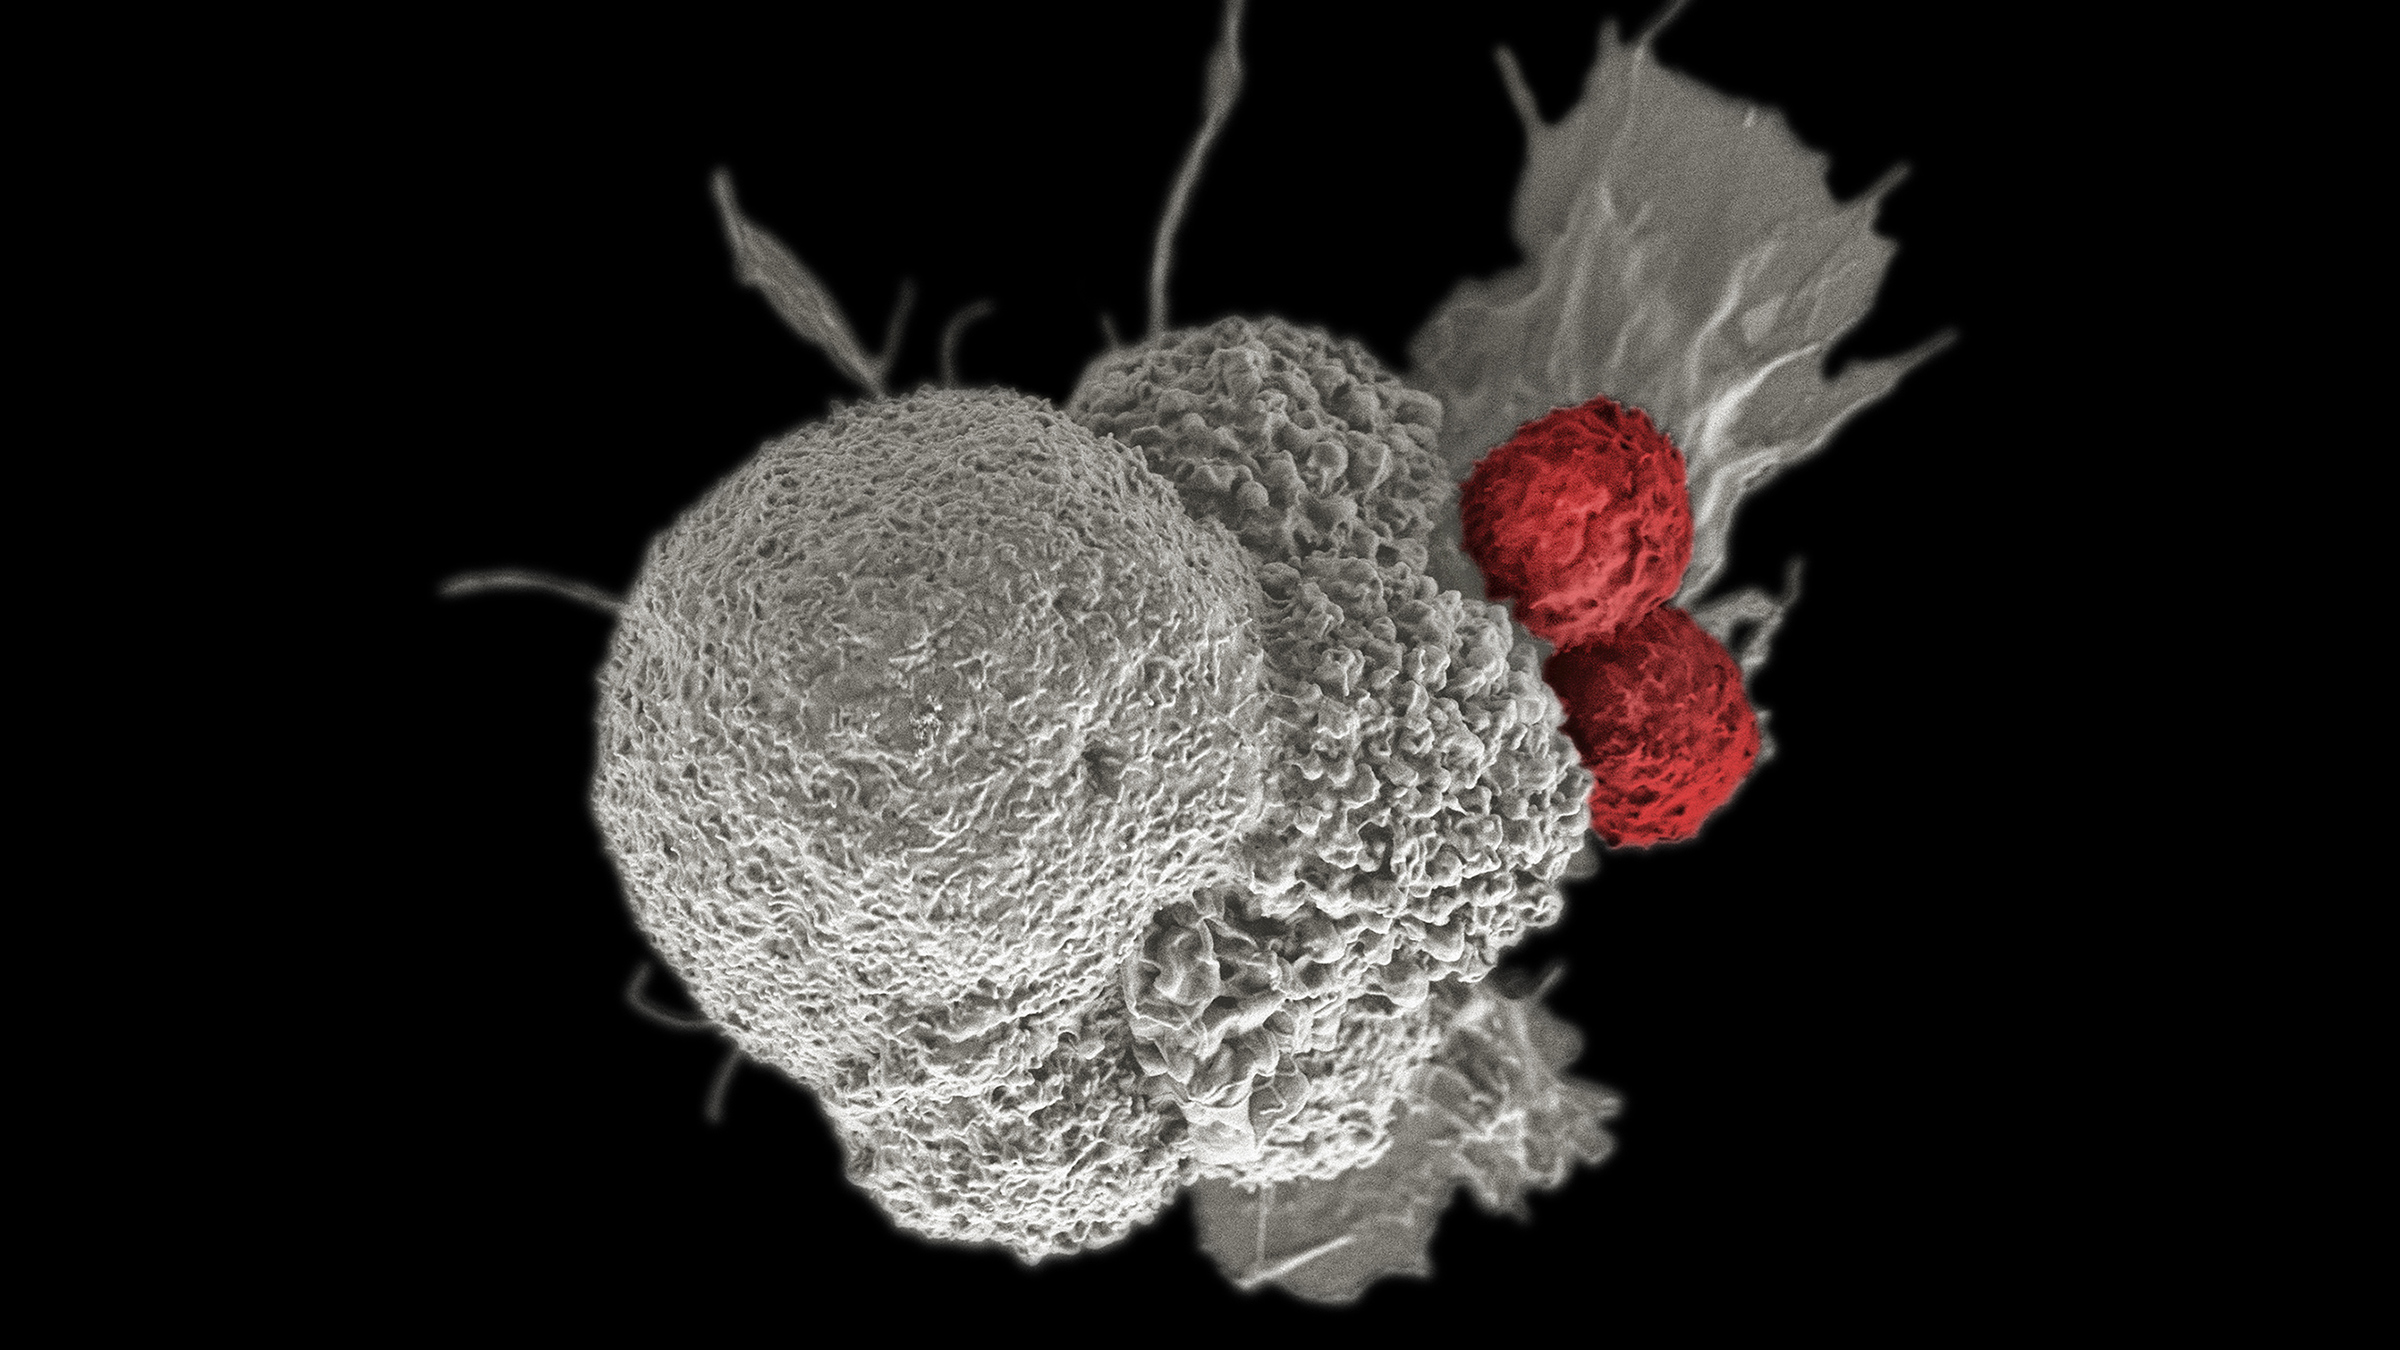 Microscope image of a cancer cell with immune cells attached